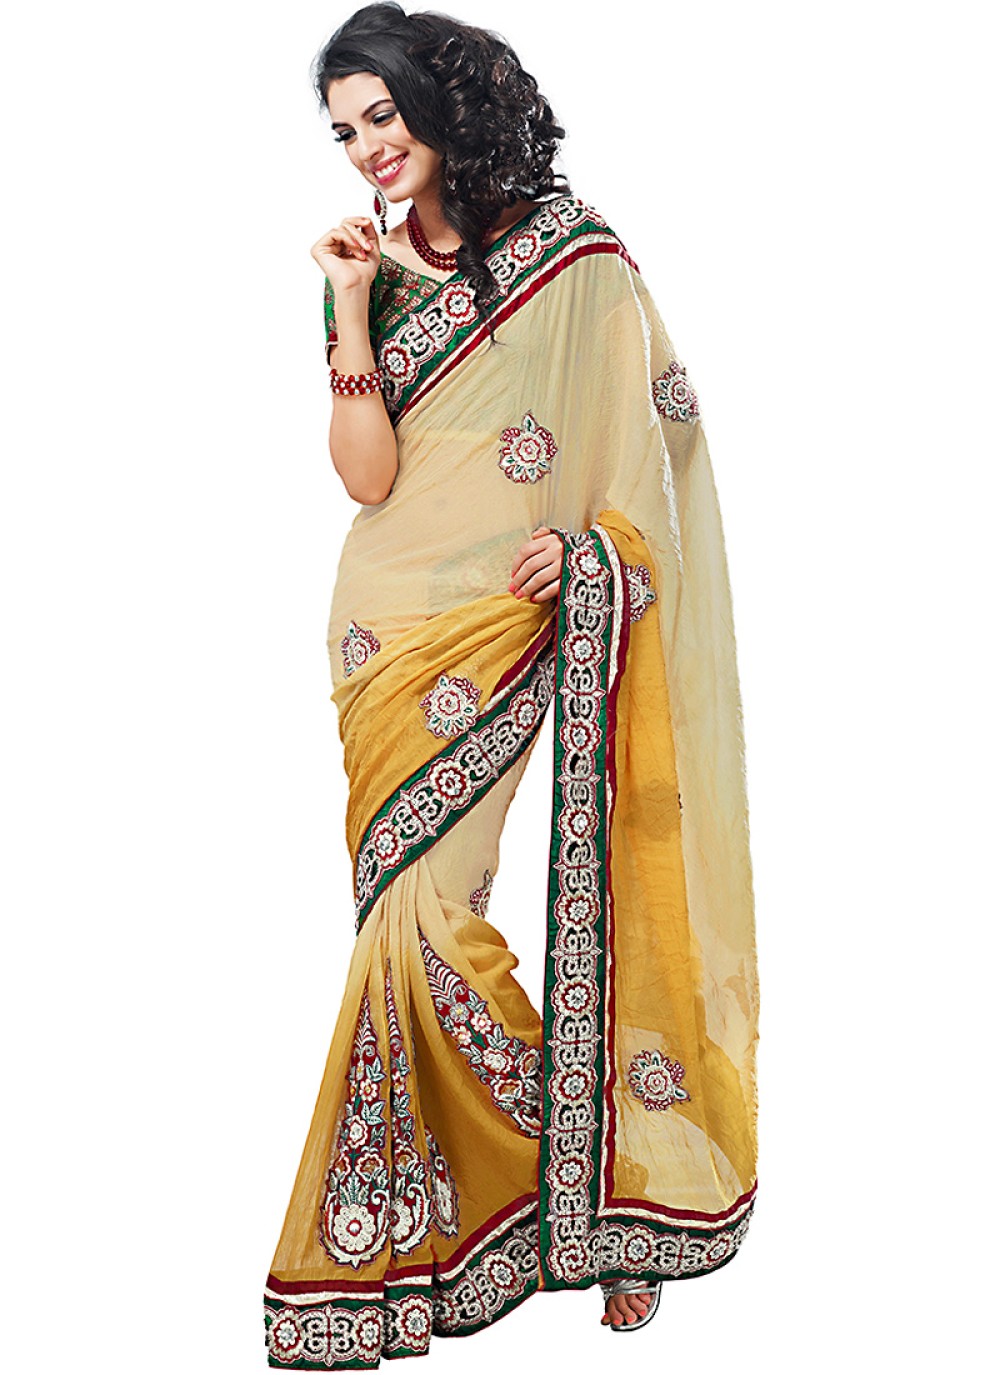 Bige Brown & Gold Color Embroidered Saree